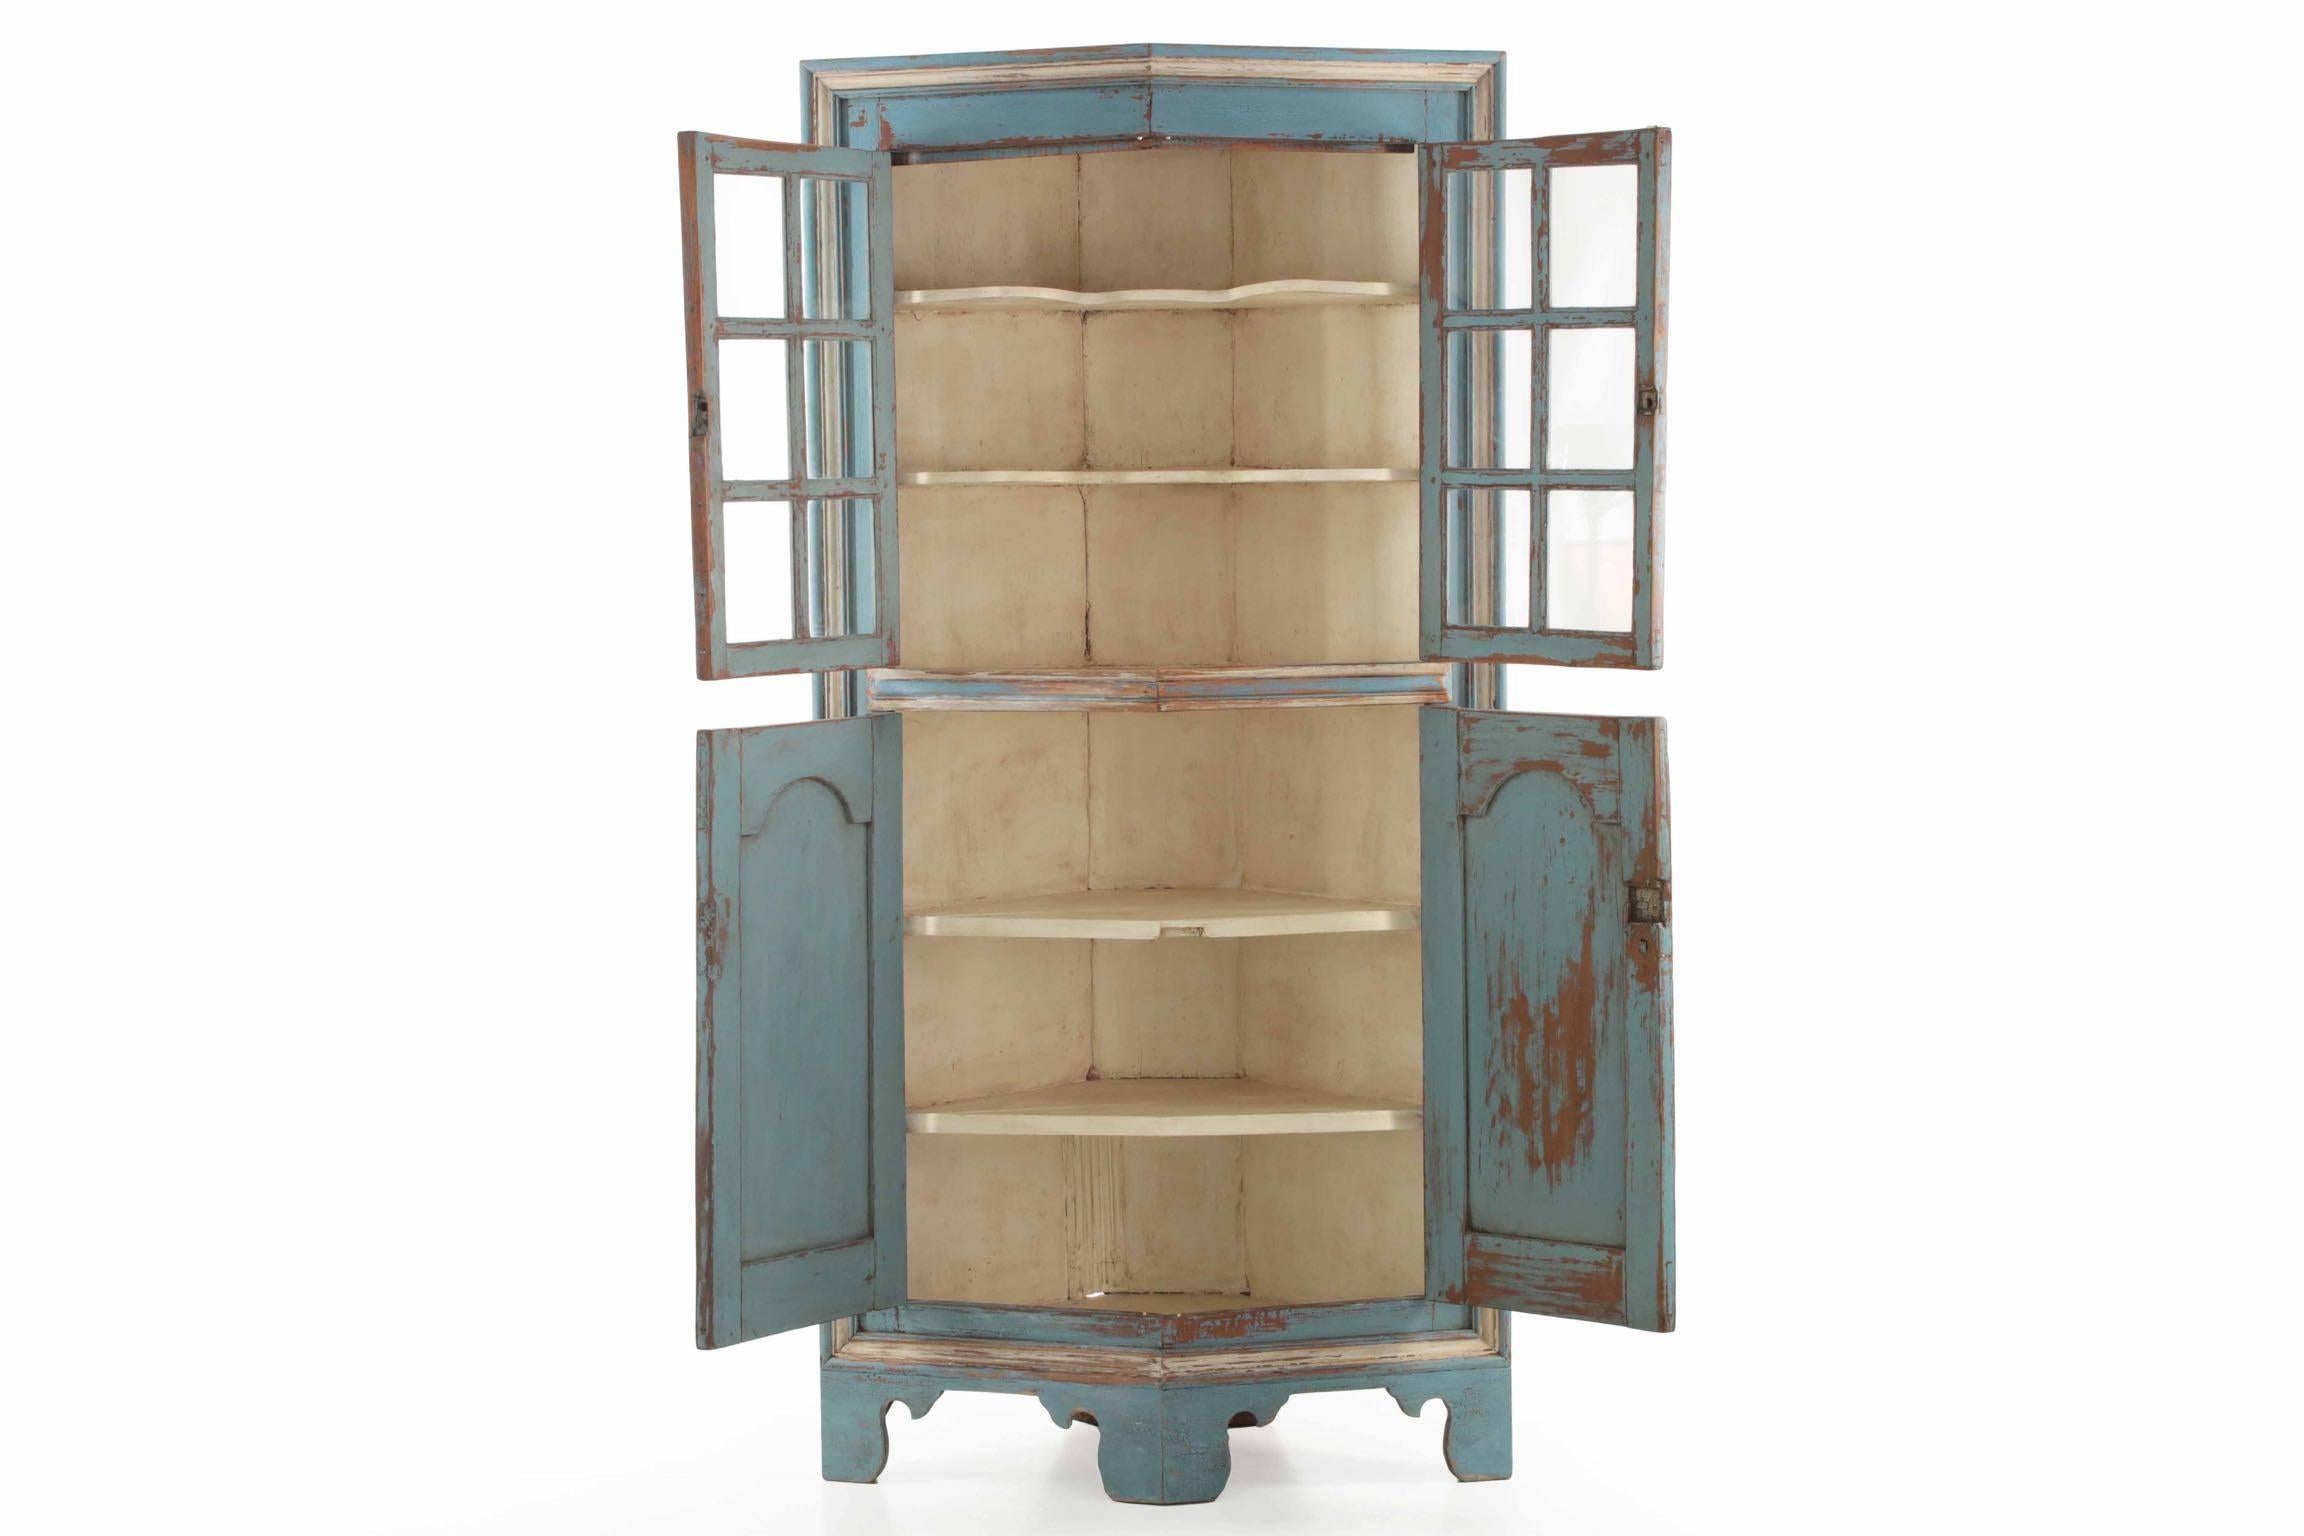 This carefully crafted cabinet is a visually stunning, deeply patinated and worn work with great form and sense of age.  The faceted shape is just gorgeous - a pair of doors with six glass panes under worn molded astragals framed in double-pinned